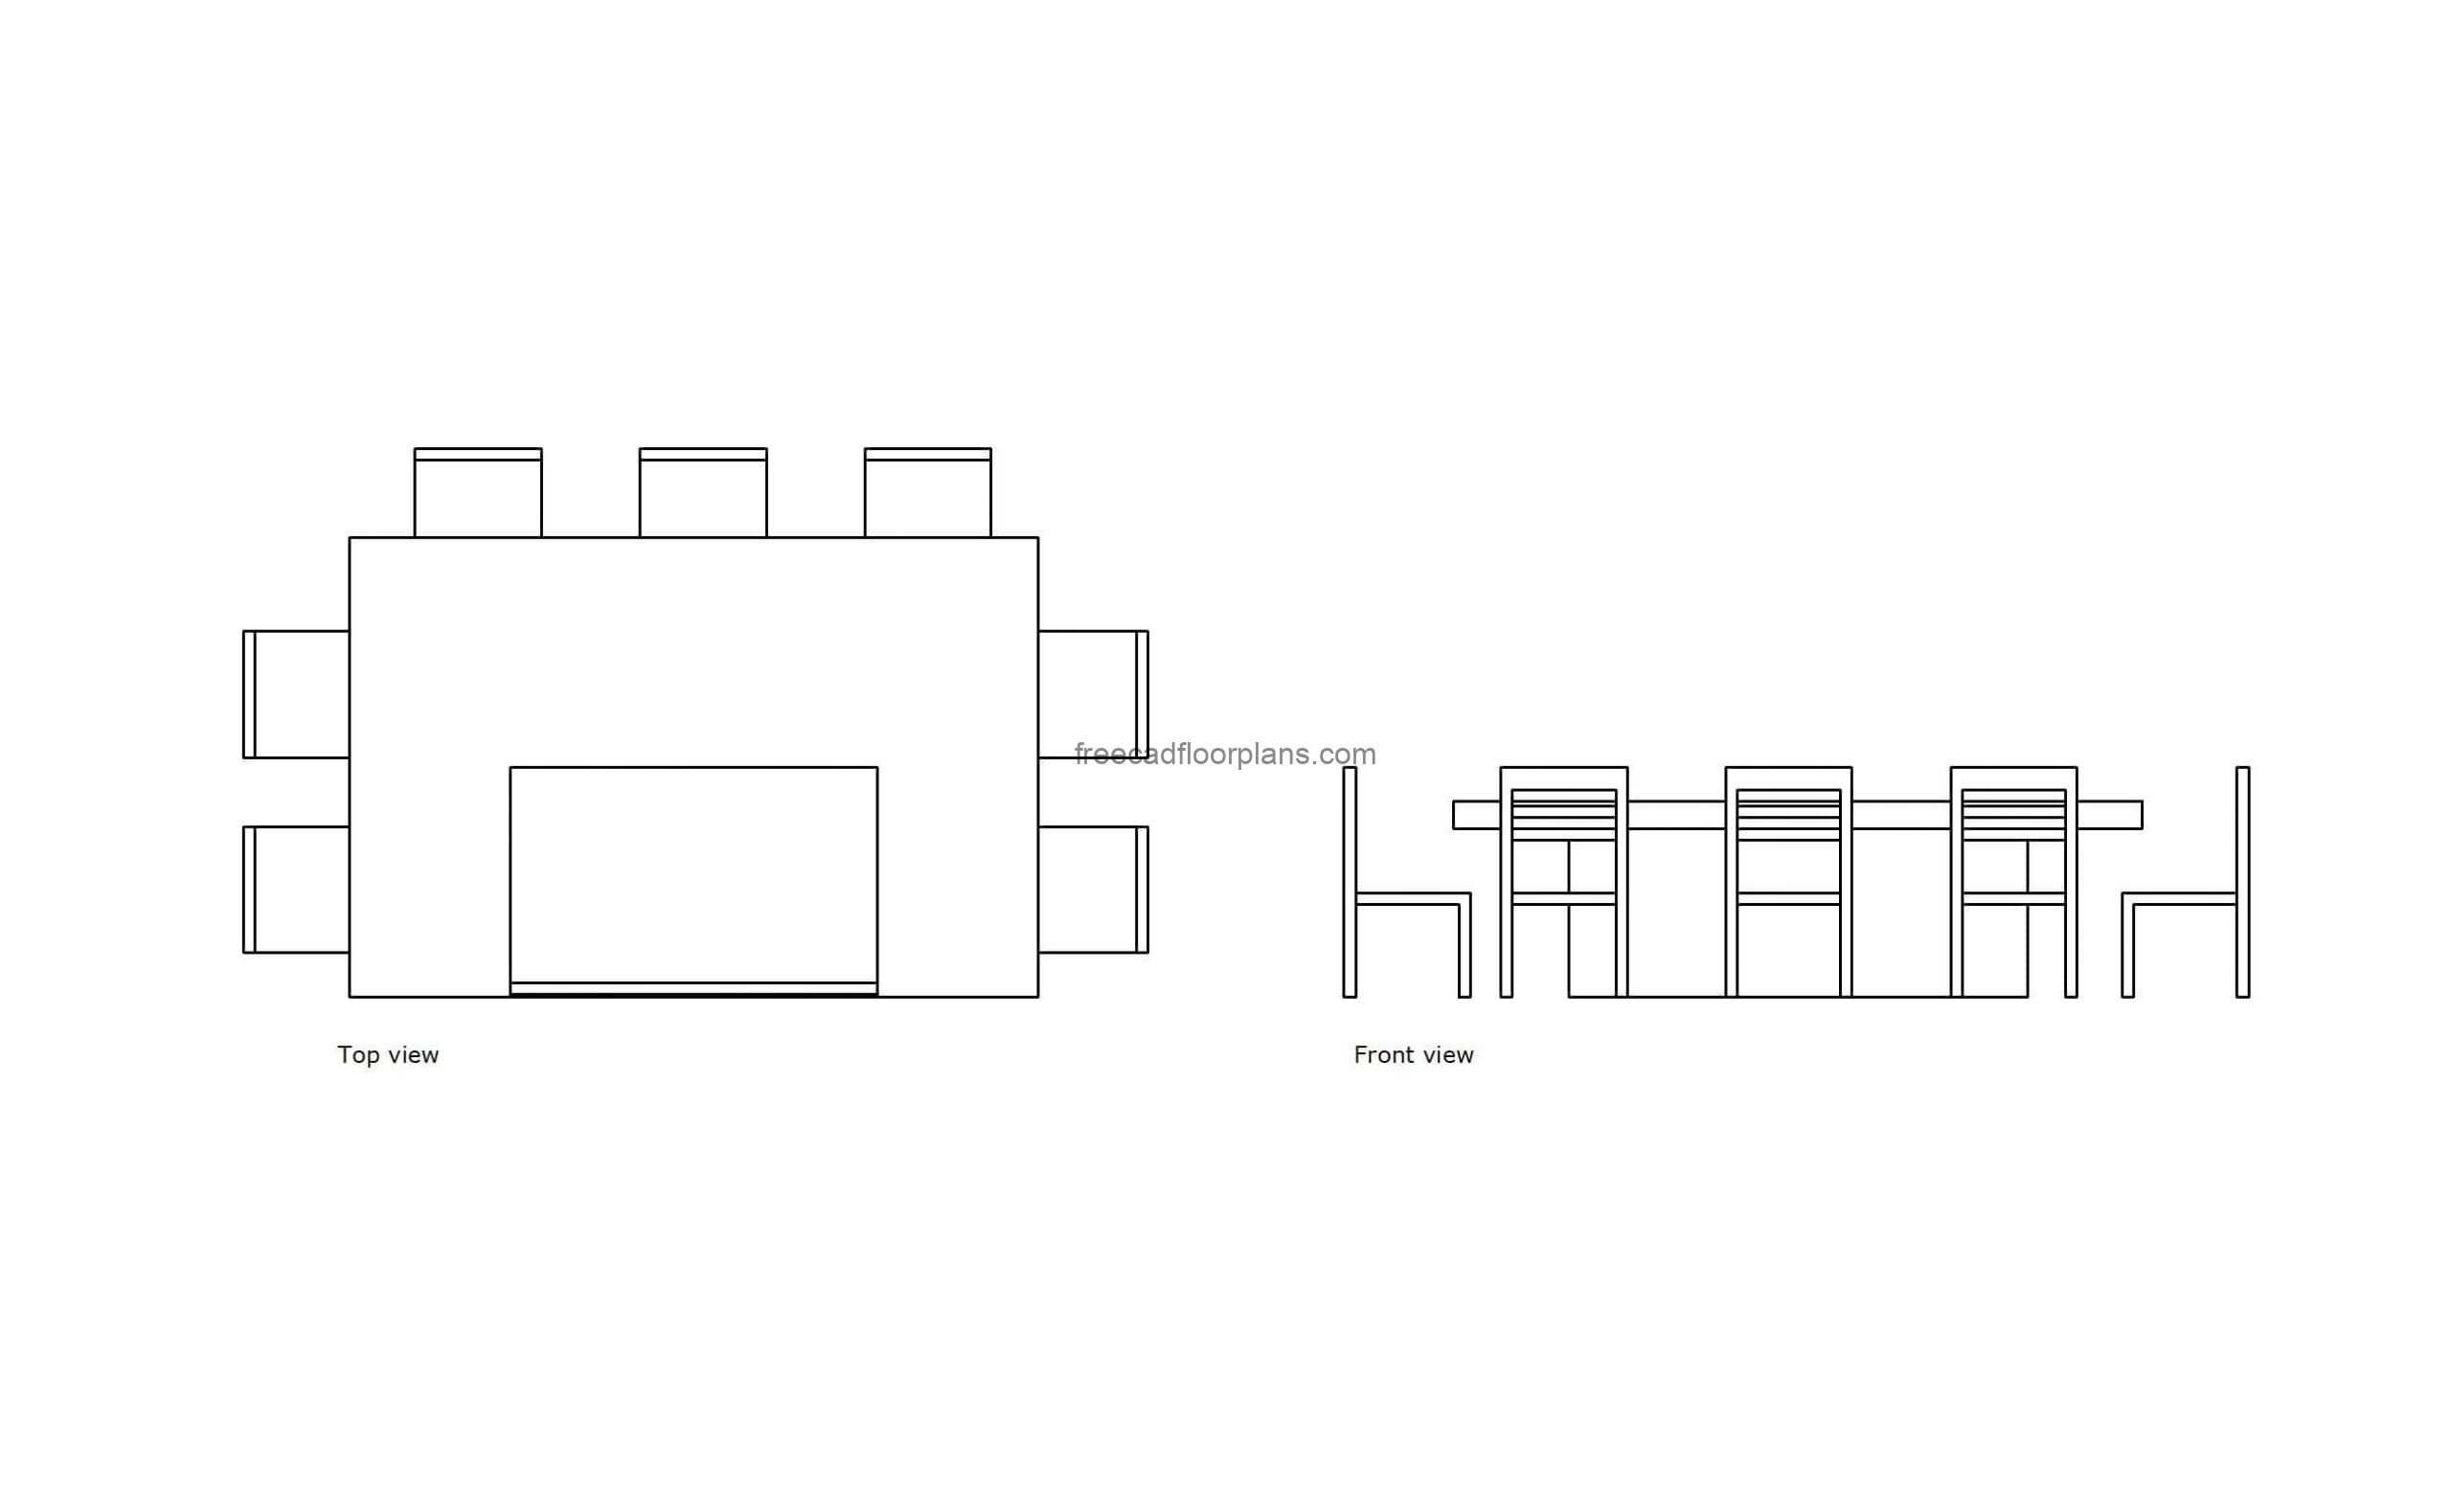 autocad drawing of a teppanyaki table,2d plan and elevation views, dwg file free for download